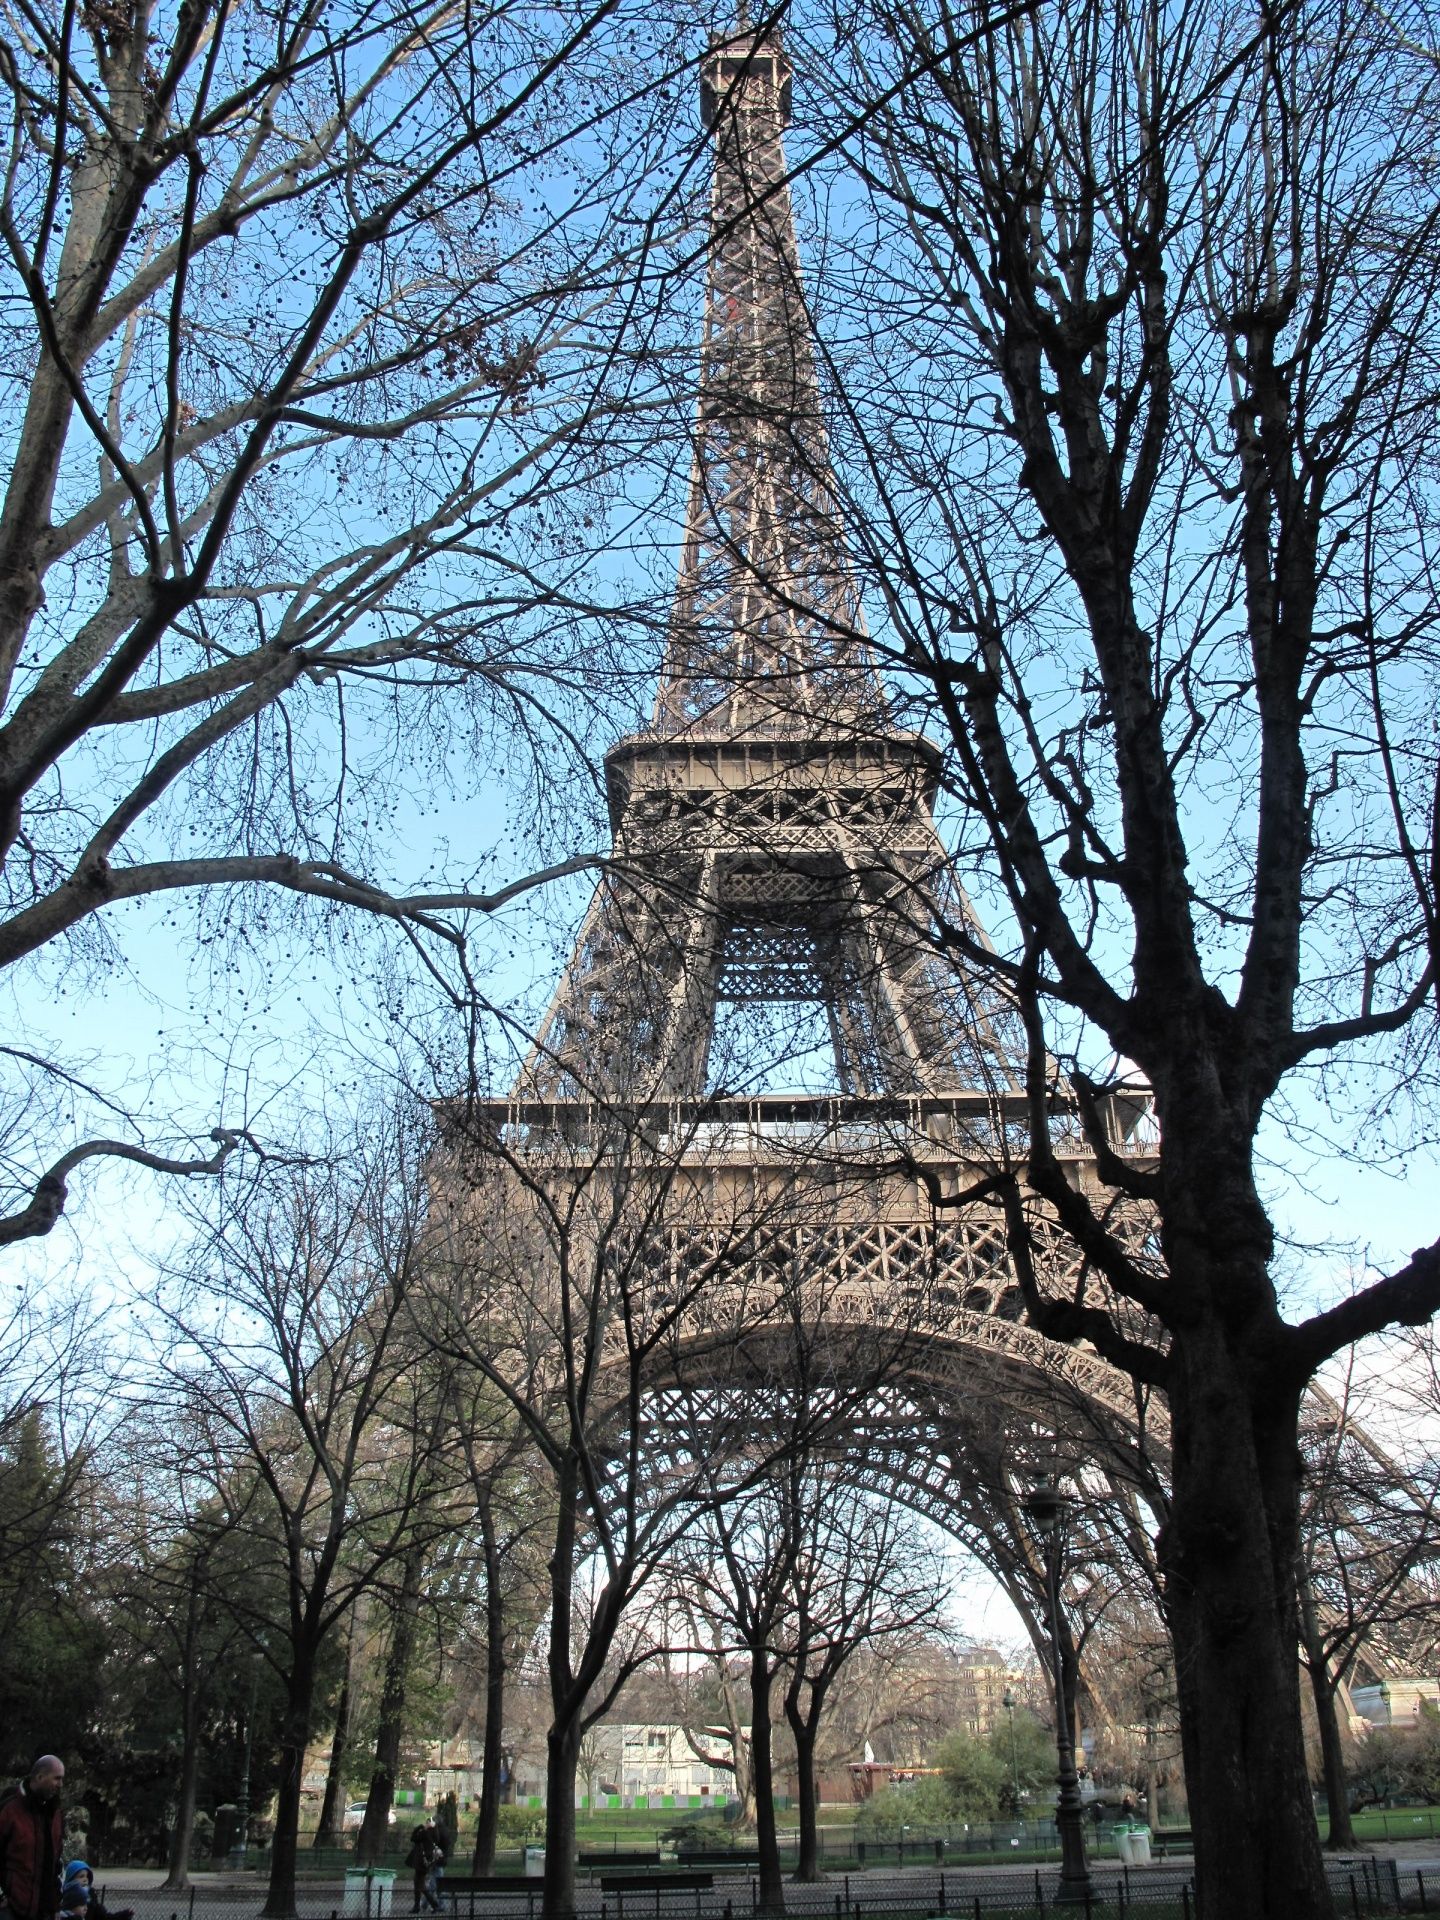 Download free photo of Eiffel tower, paris, france, winter, trees